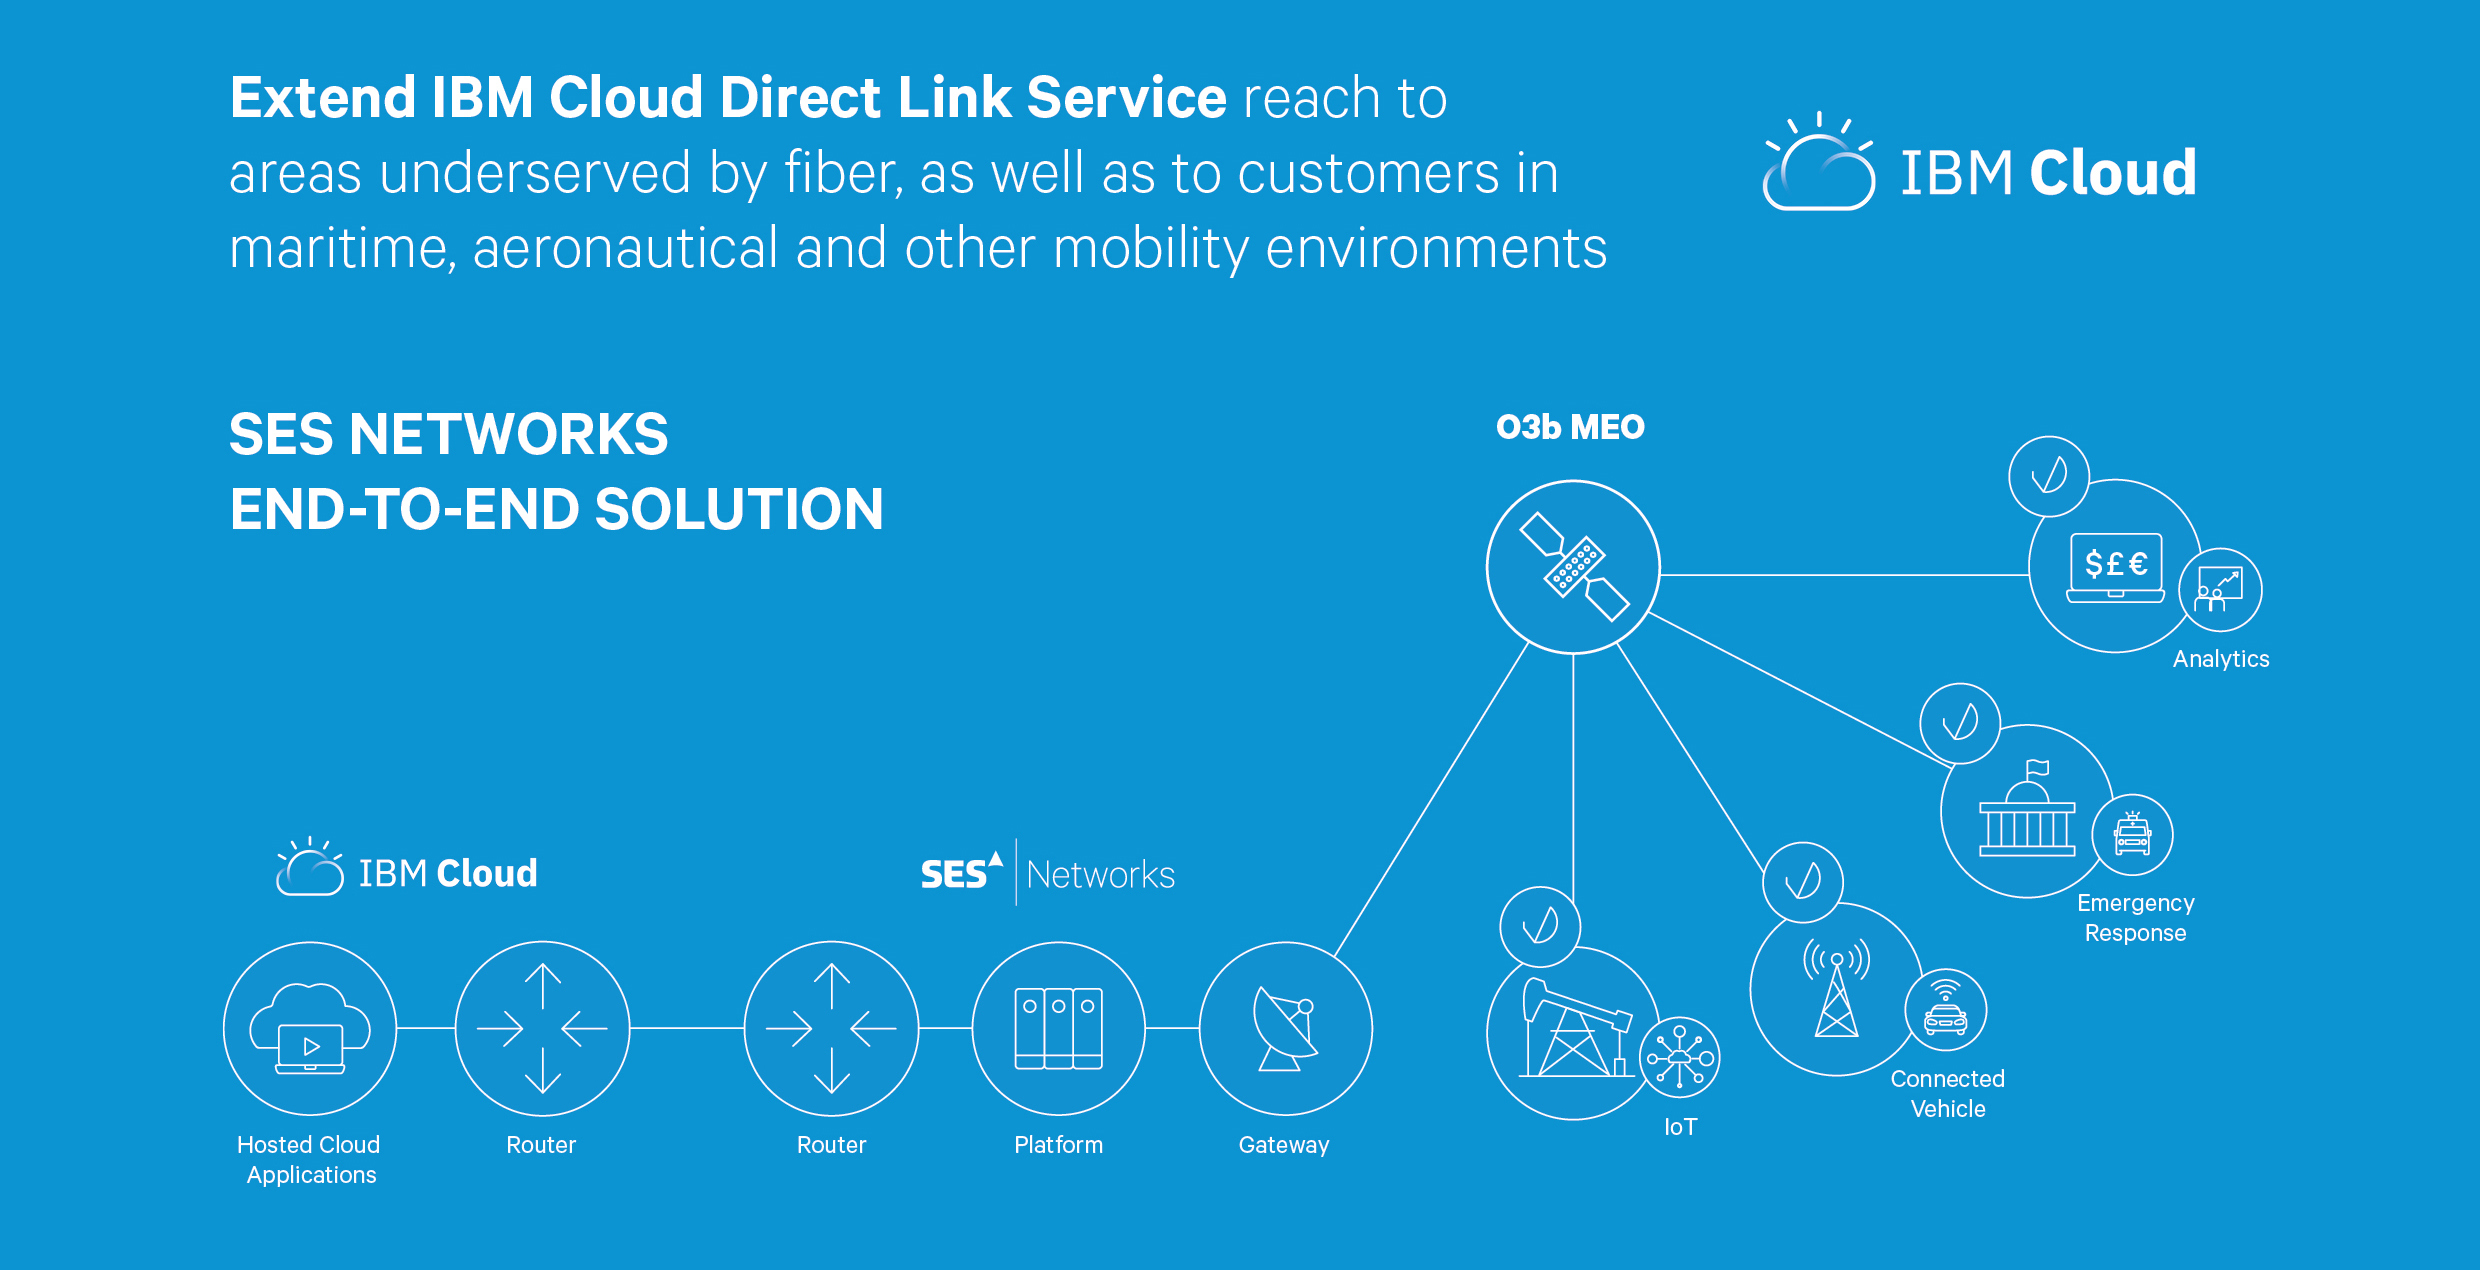 A diagram showing how to extend the IBM Cloud Direct Link Service to reach areas underserved by fiber as well as customers in maritime, aeronautical, and other mobility environments.